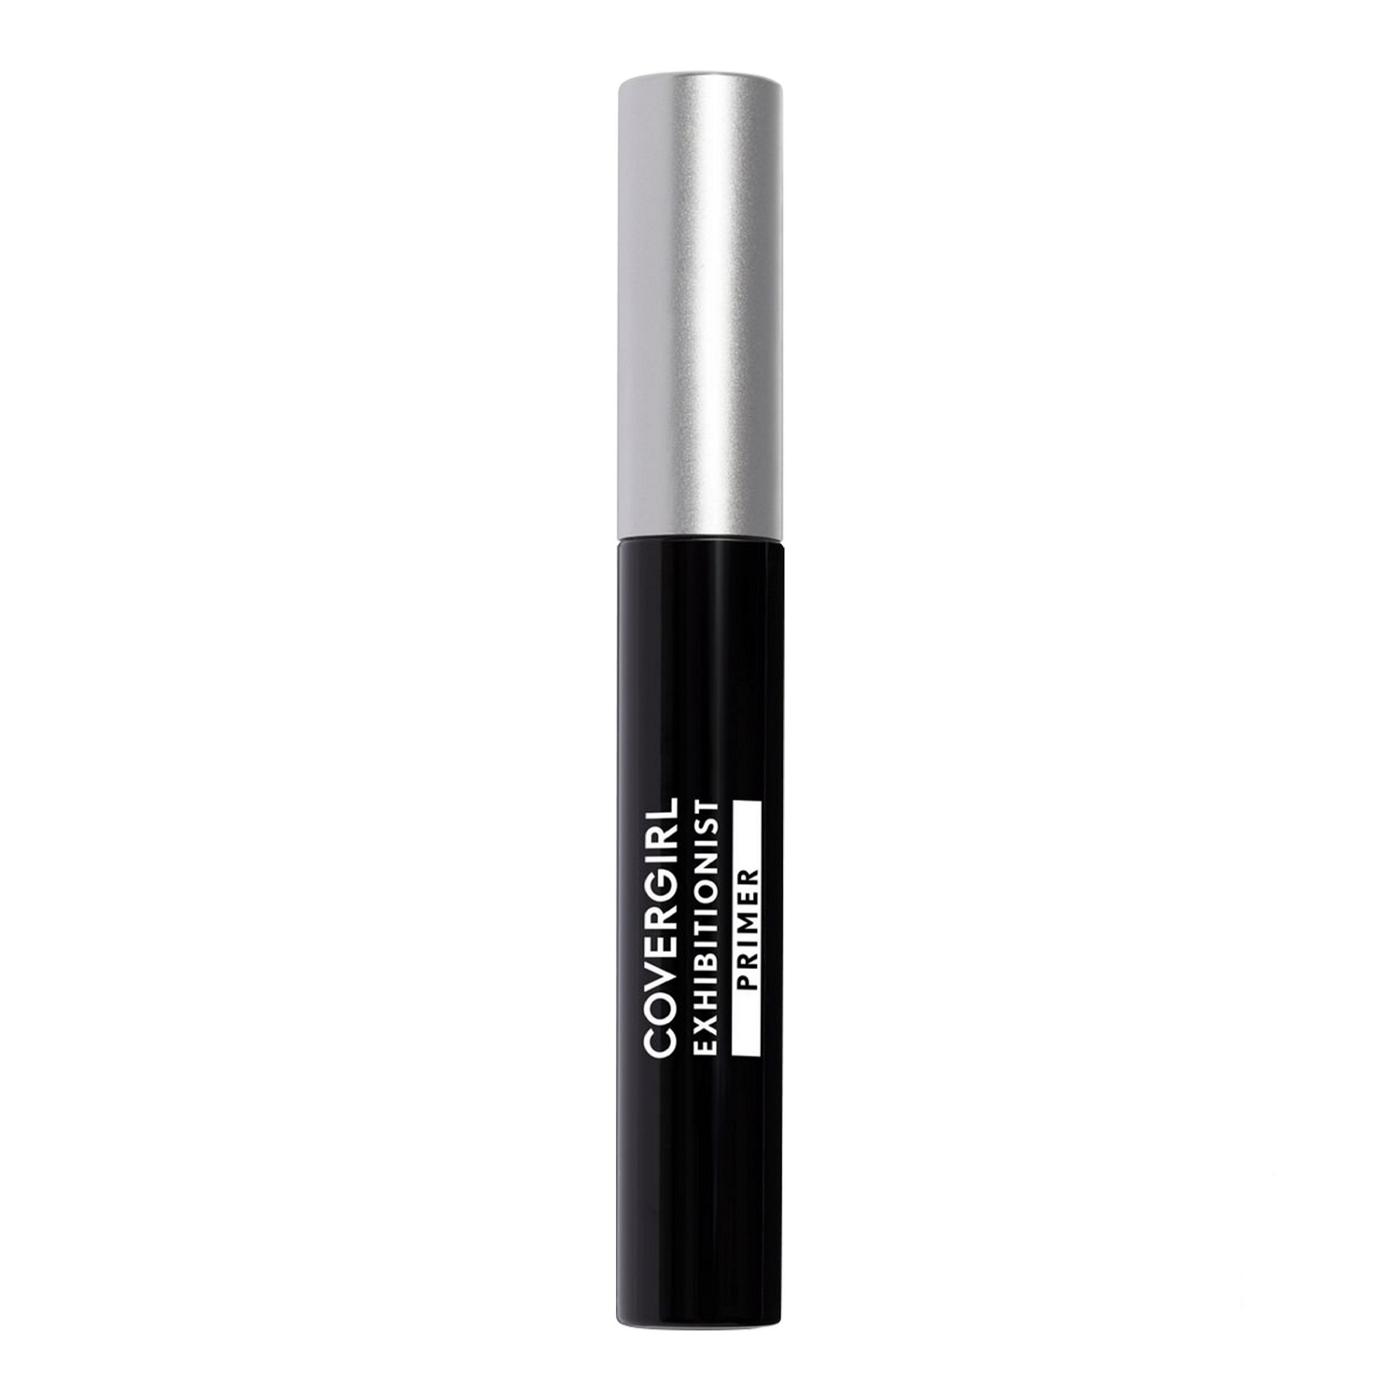 Covergirl Exhibitionist Mascara Primer 775 Off-White; image 1 of 3